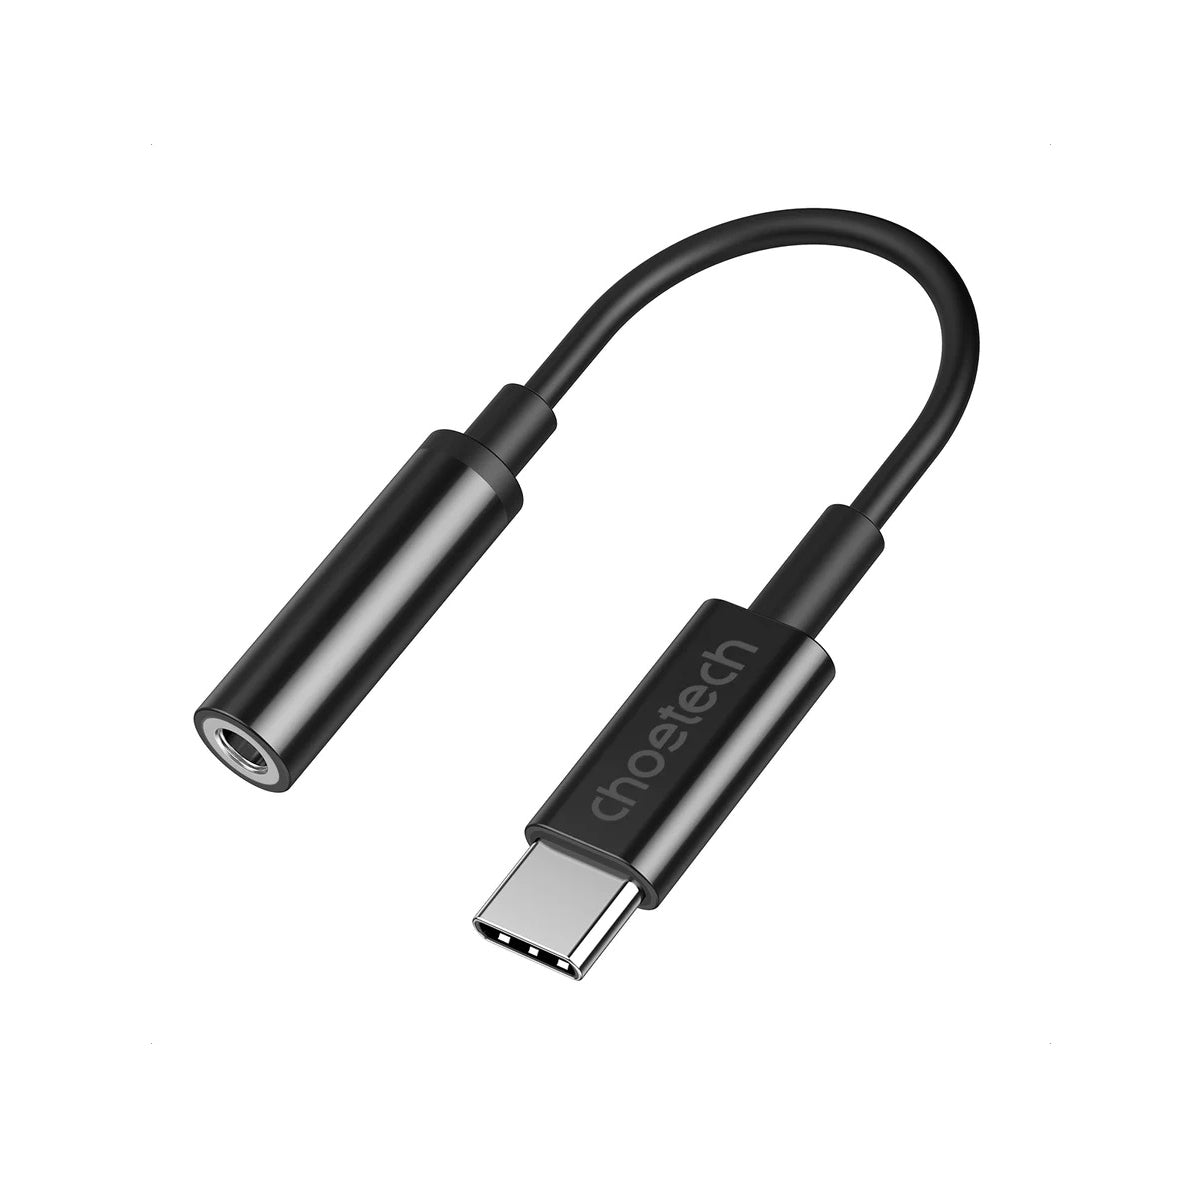 Choetech USB-C to 3.5mm Audio Jack Adapter (AUX003)